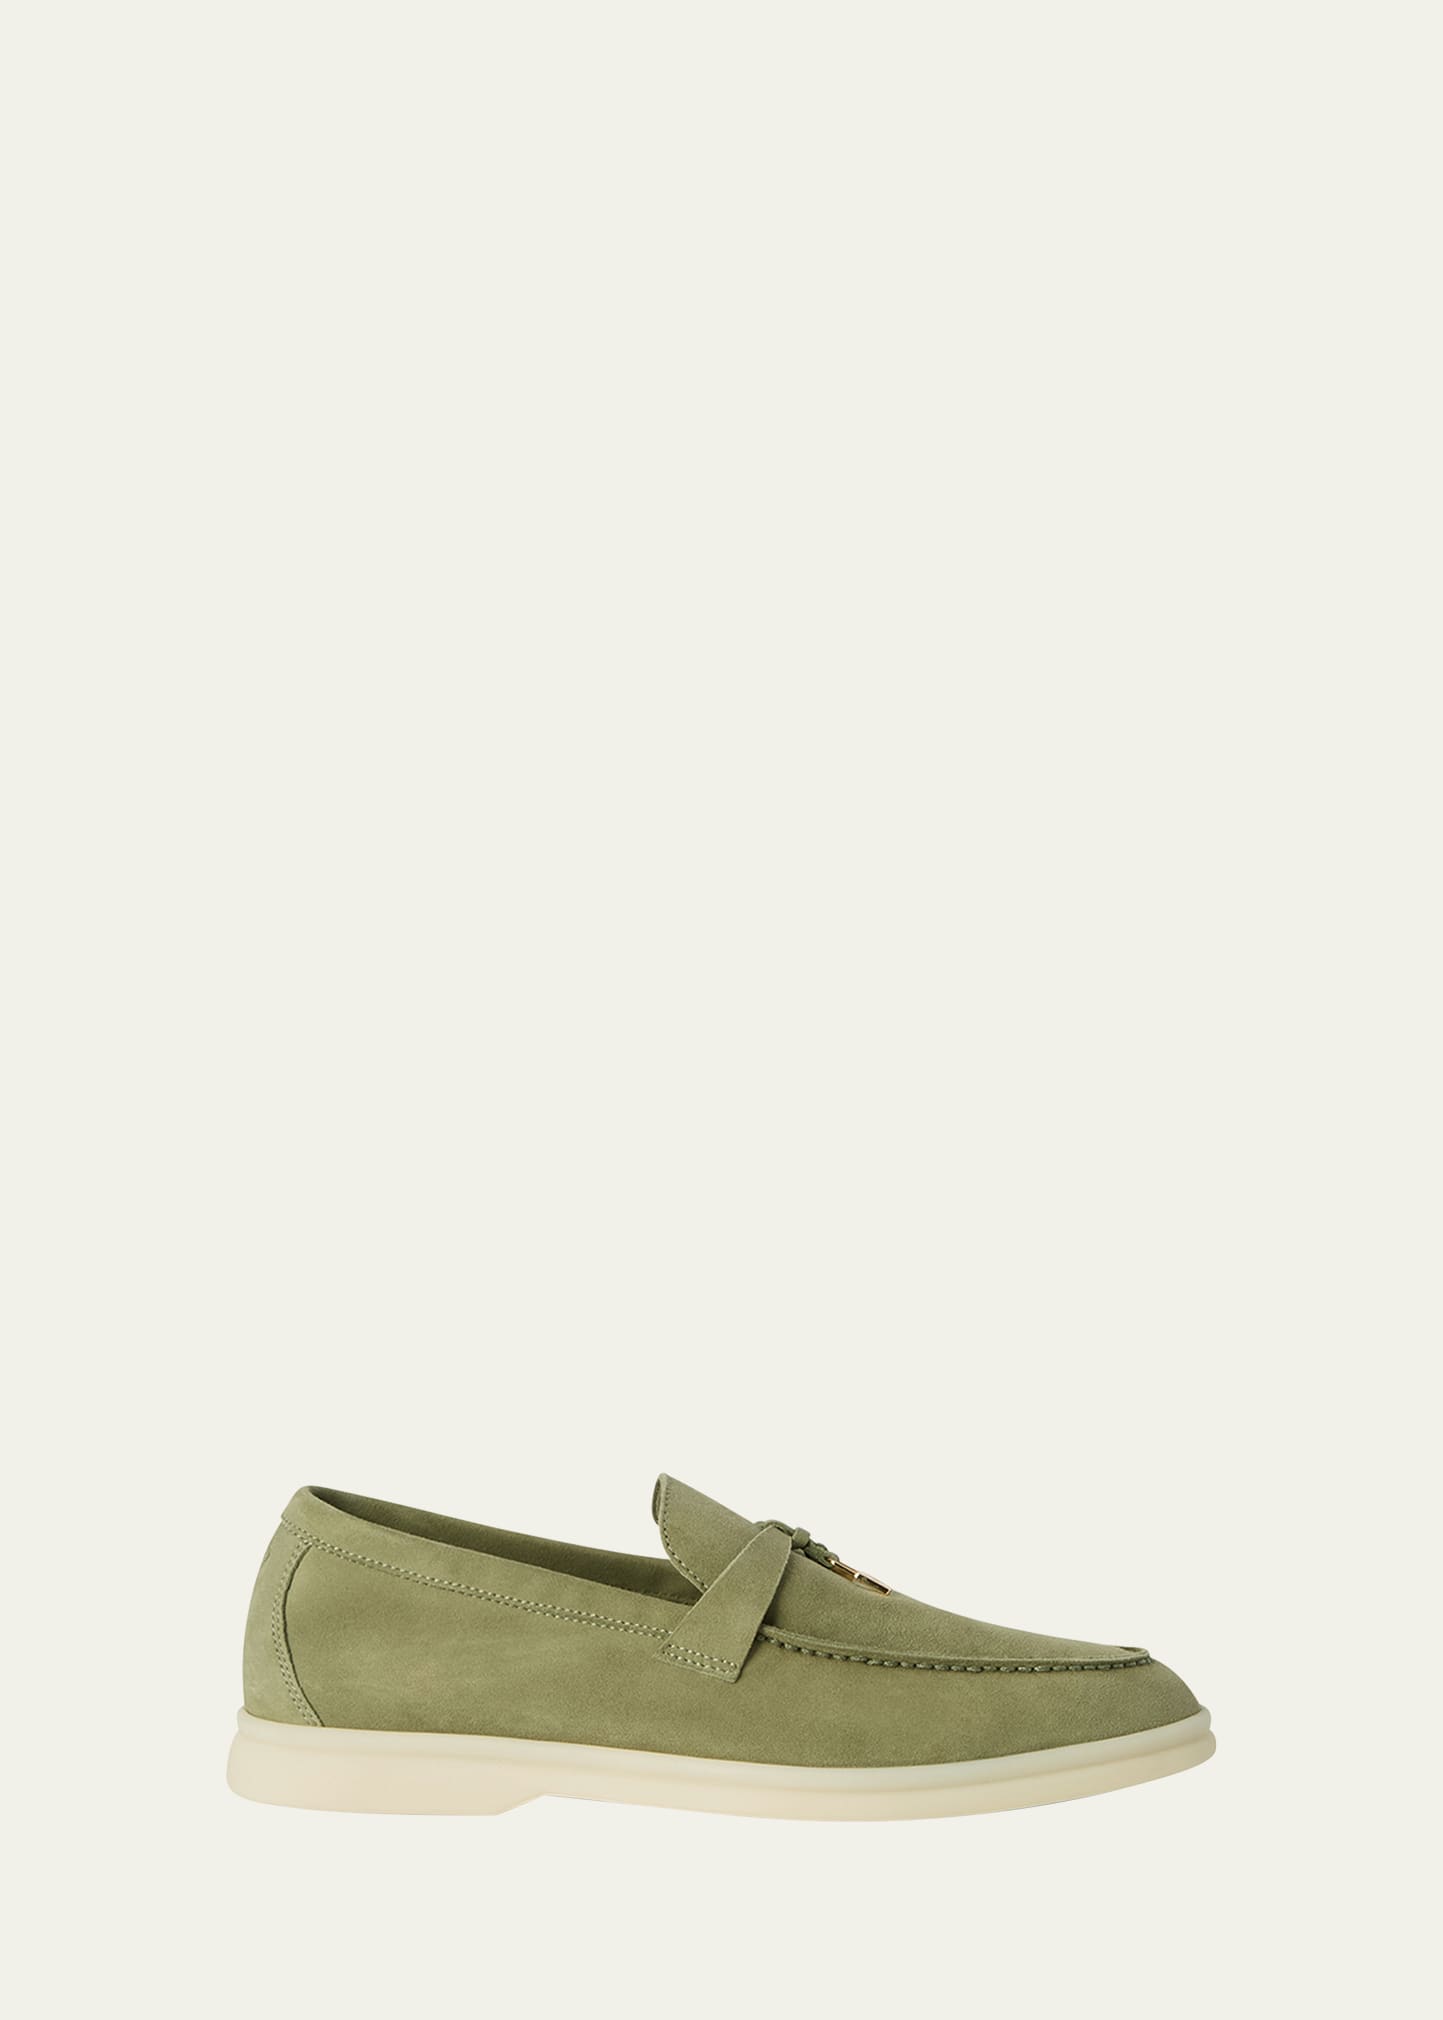 Loro Piana Summer Charms Walk Suede Loafers In Tea Room